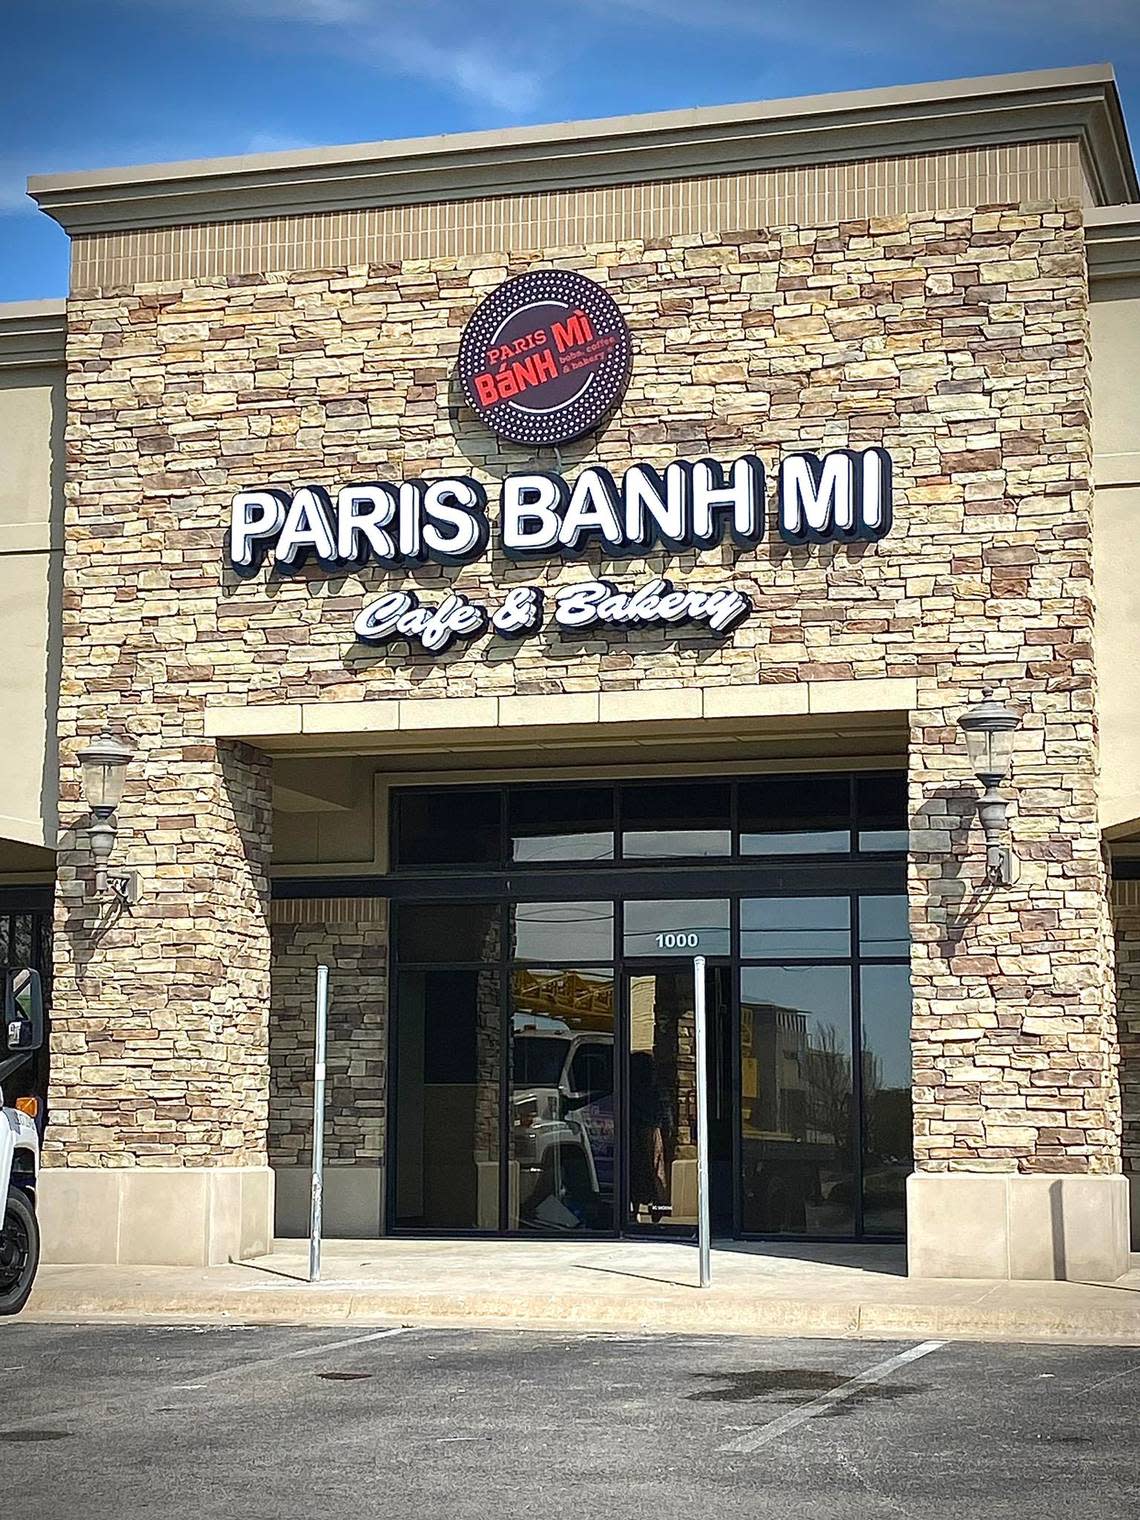 The Paris Banh Mi restaurant at 2350 N. Greenwich will open in mid-May.